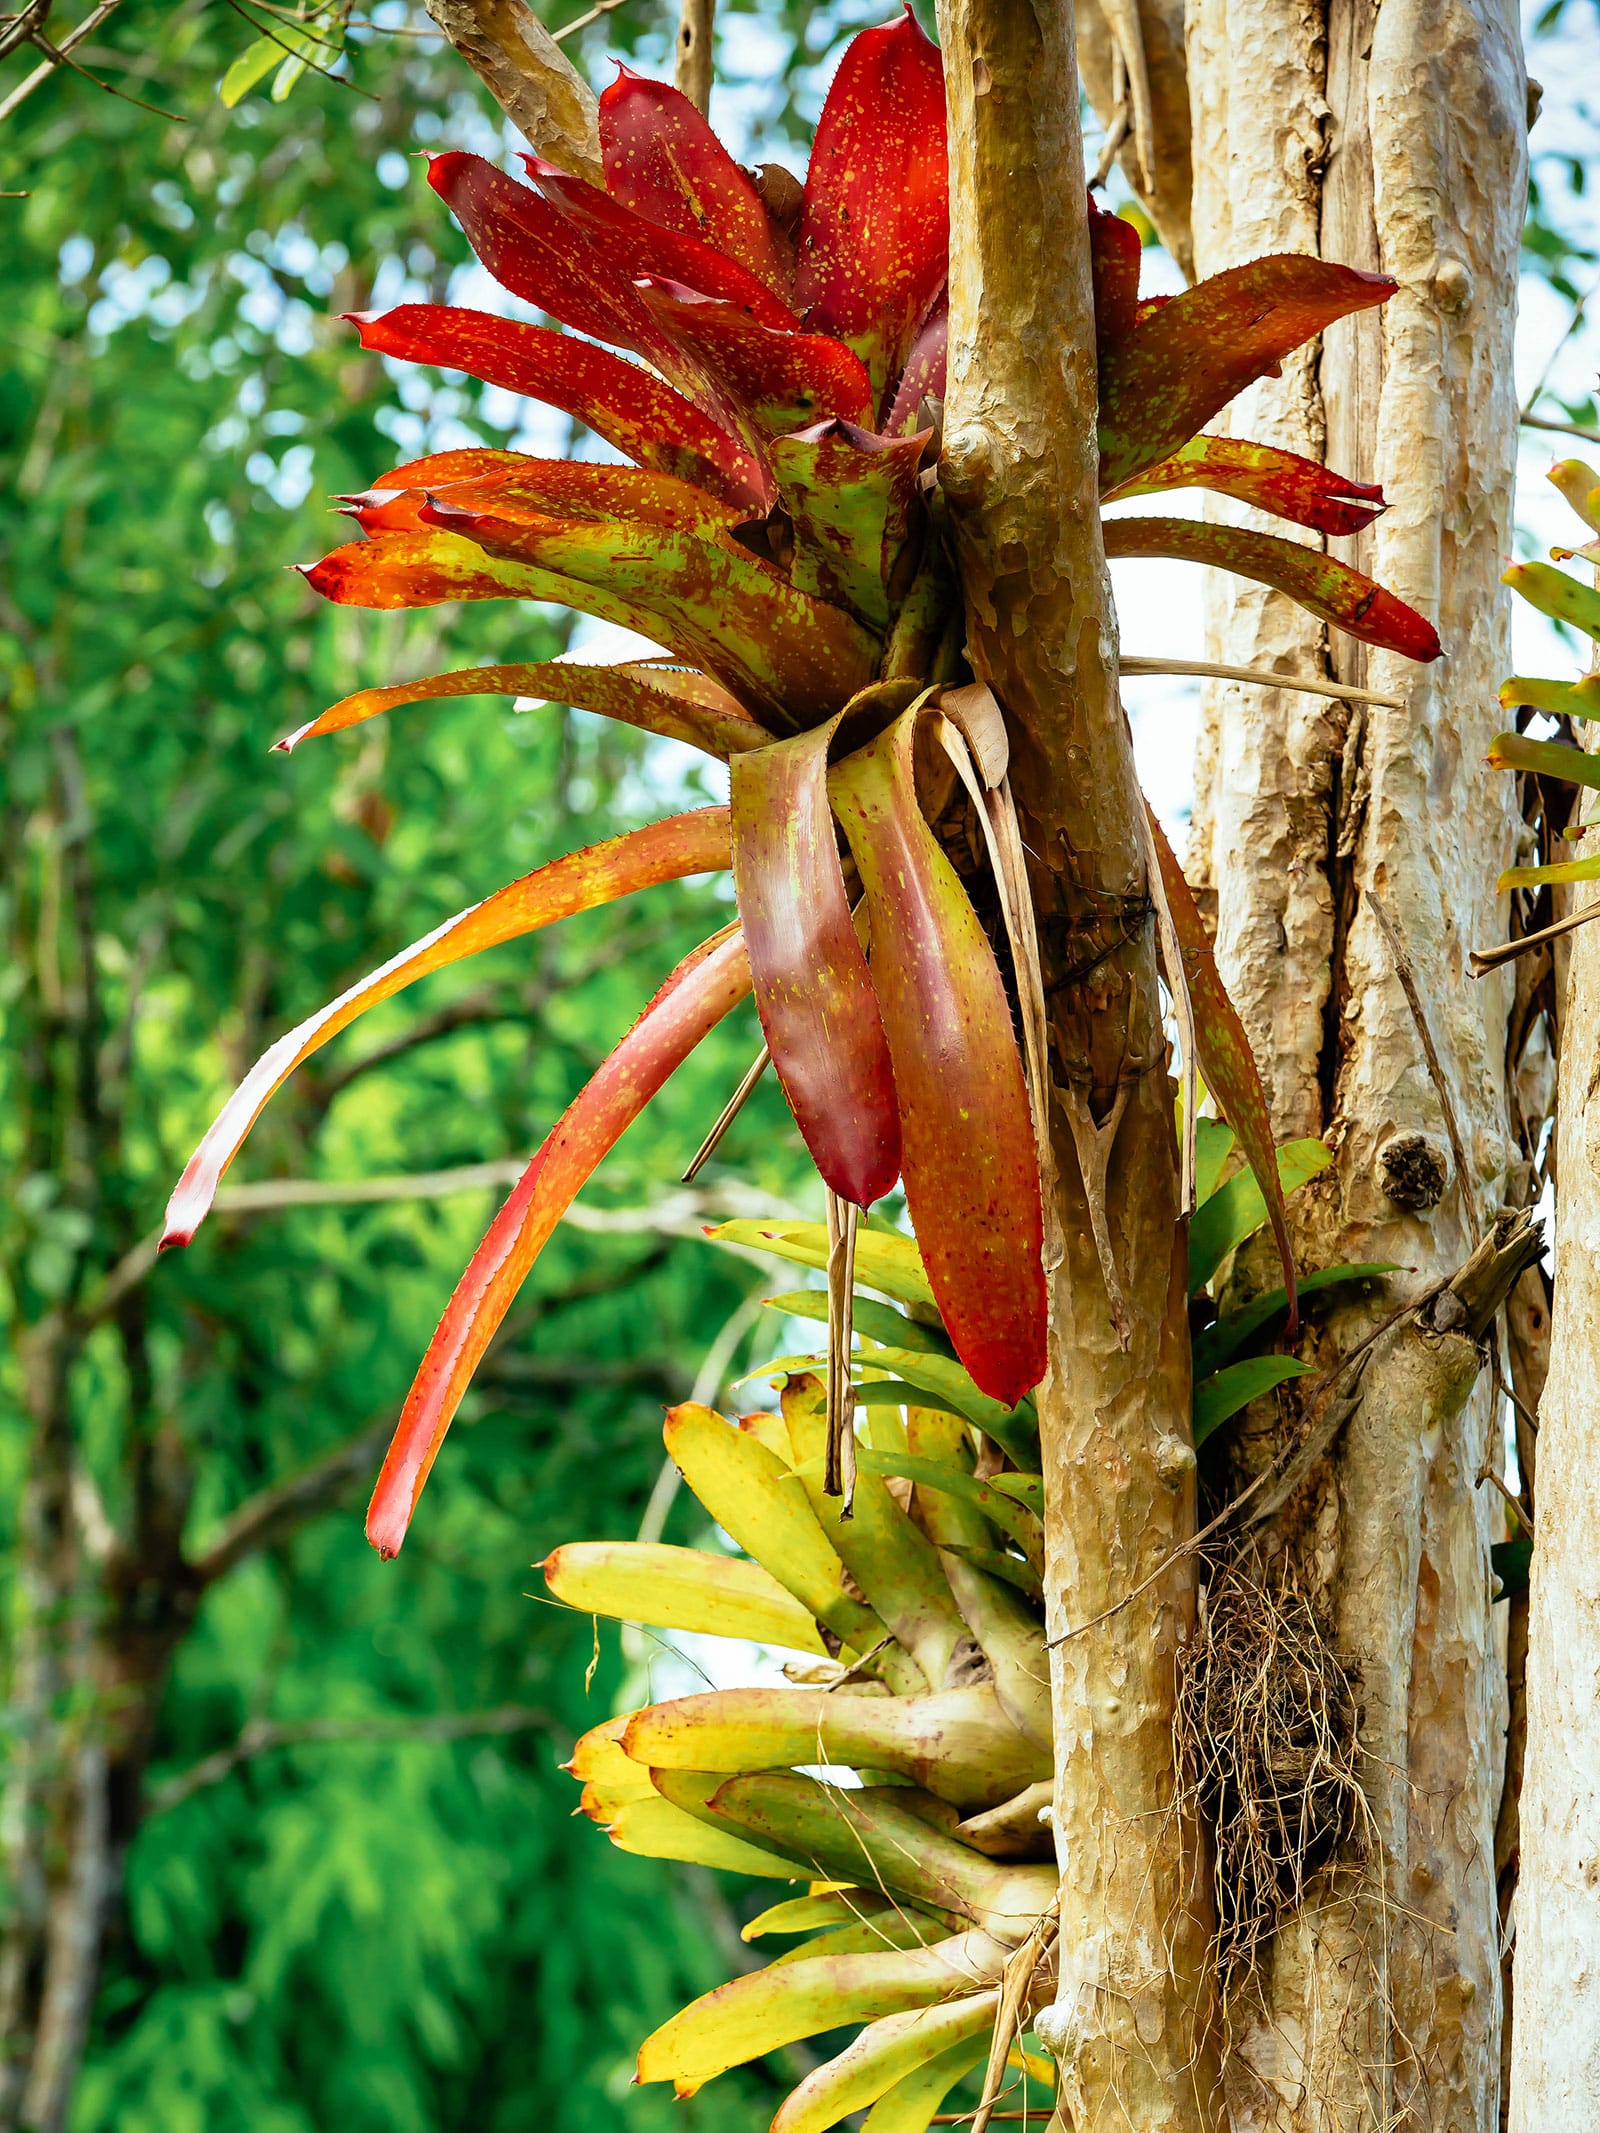 Two Guzmania bromeliads, one with red leaves and one with green leaves, growing on a tree in the wild